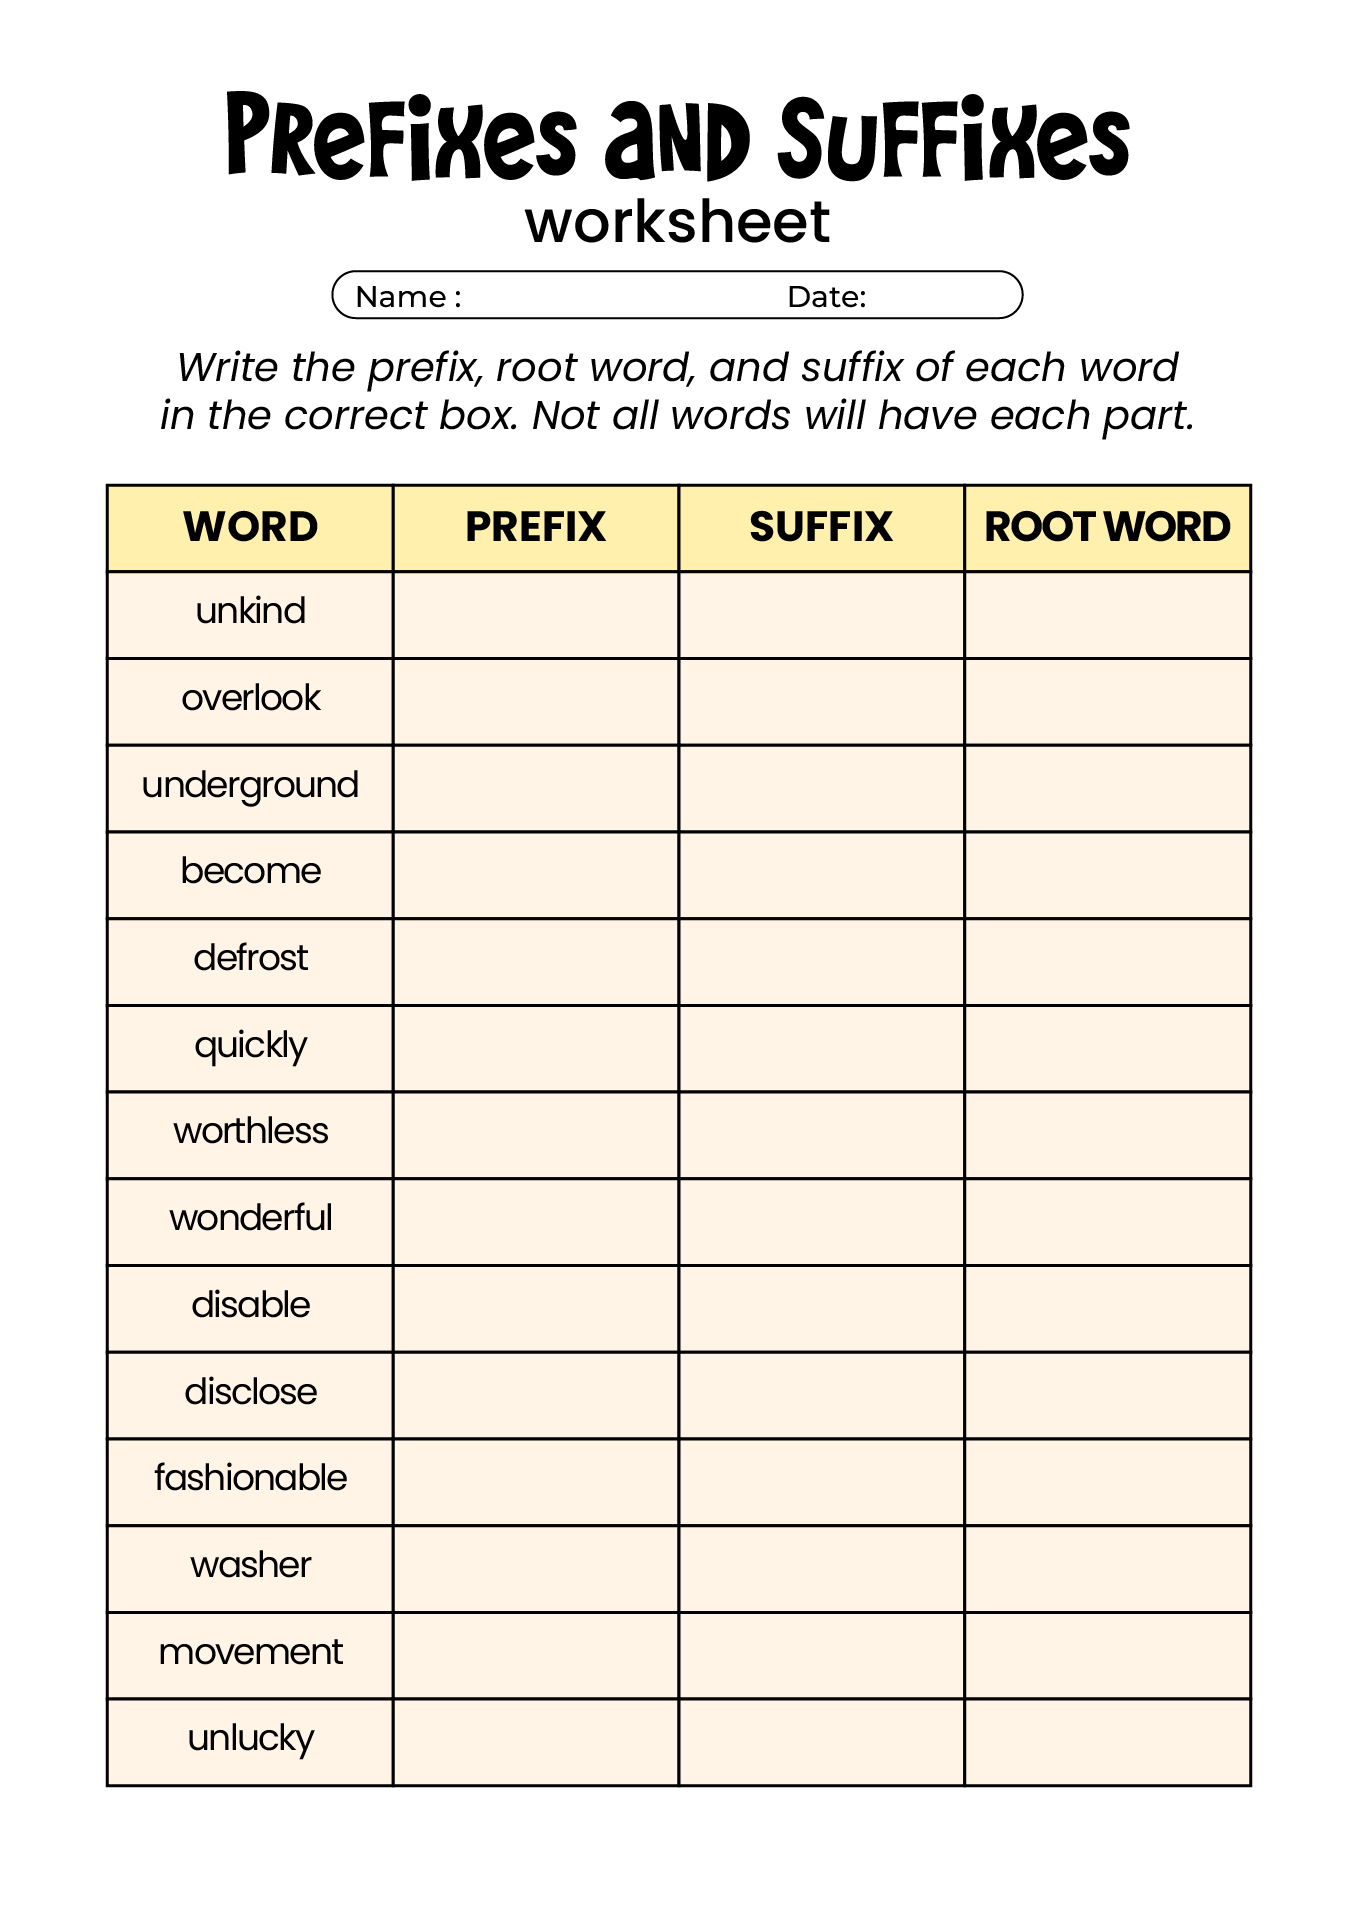 Latin Roots Prefixes and Suffixes Image